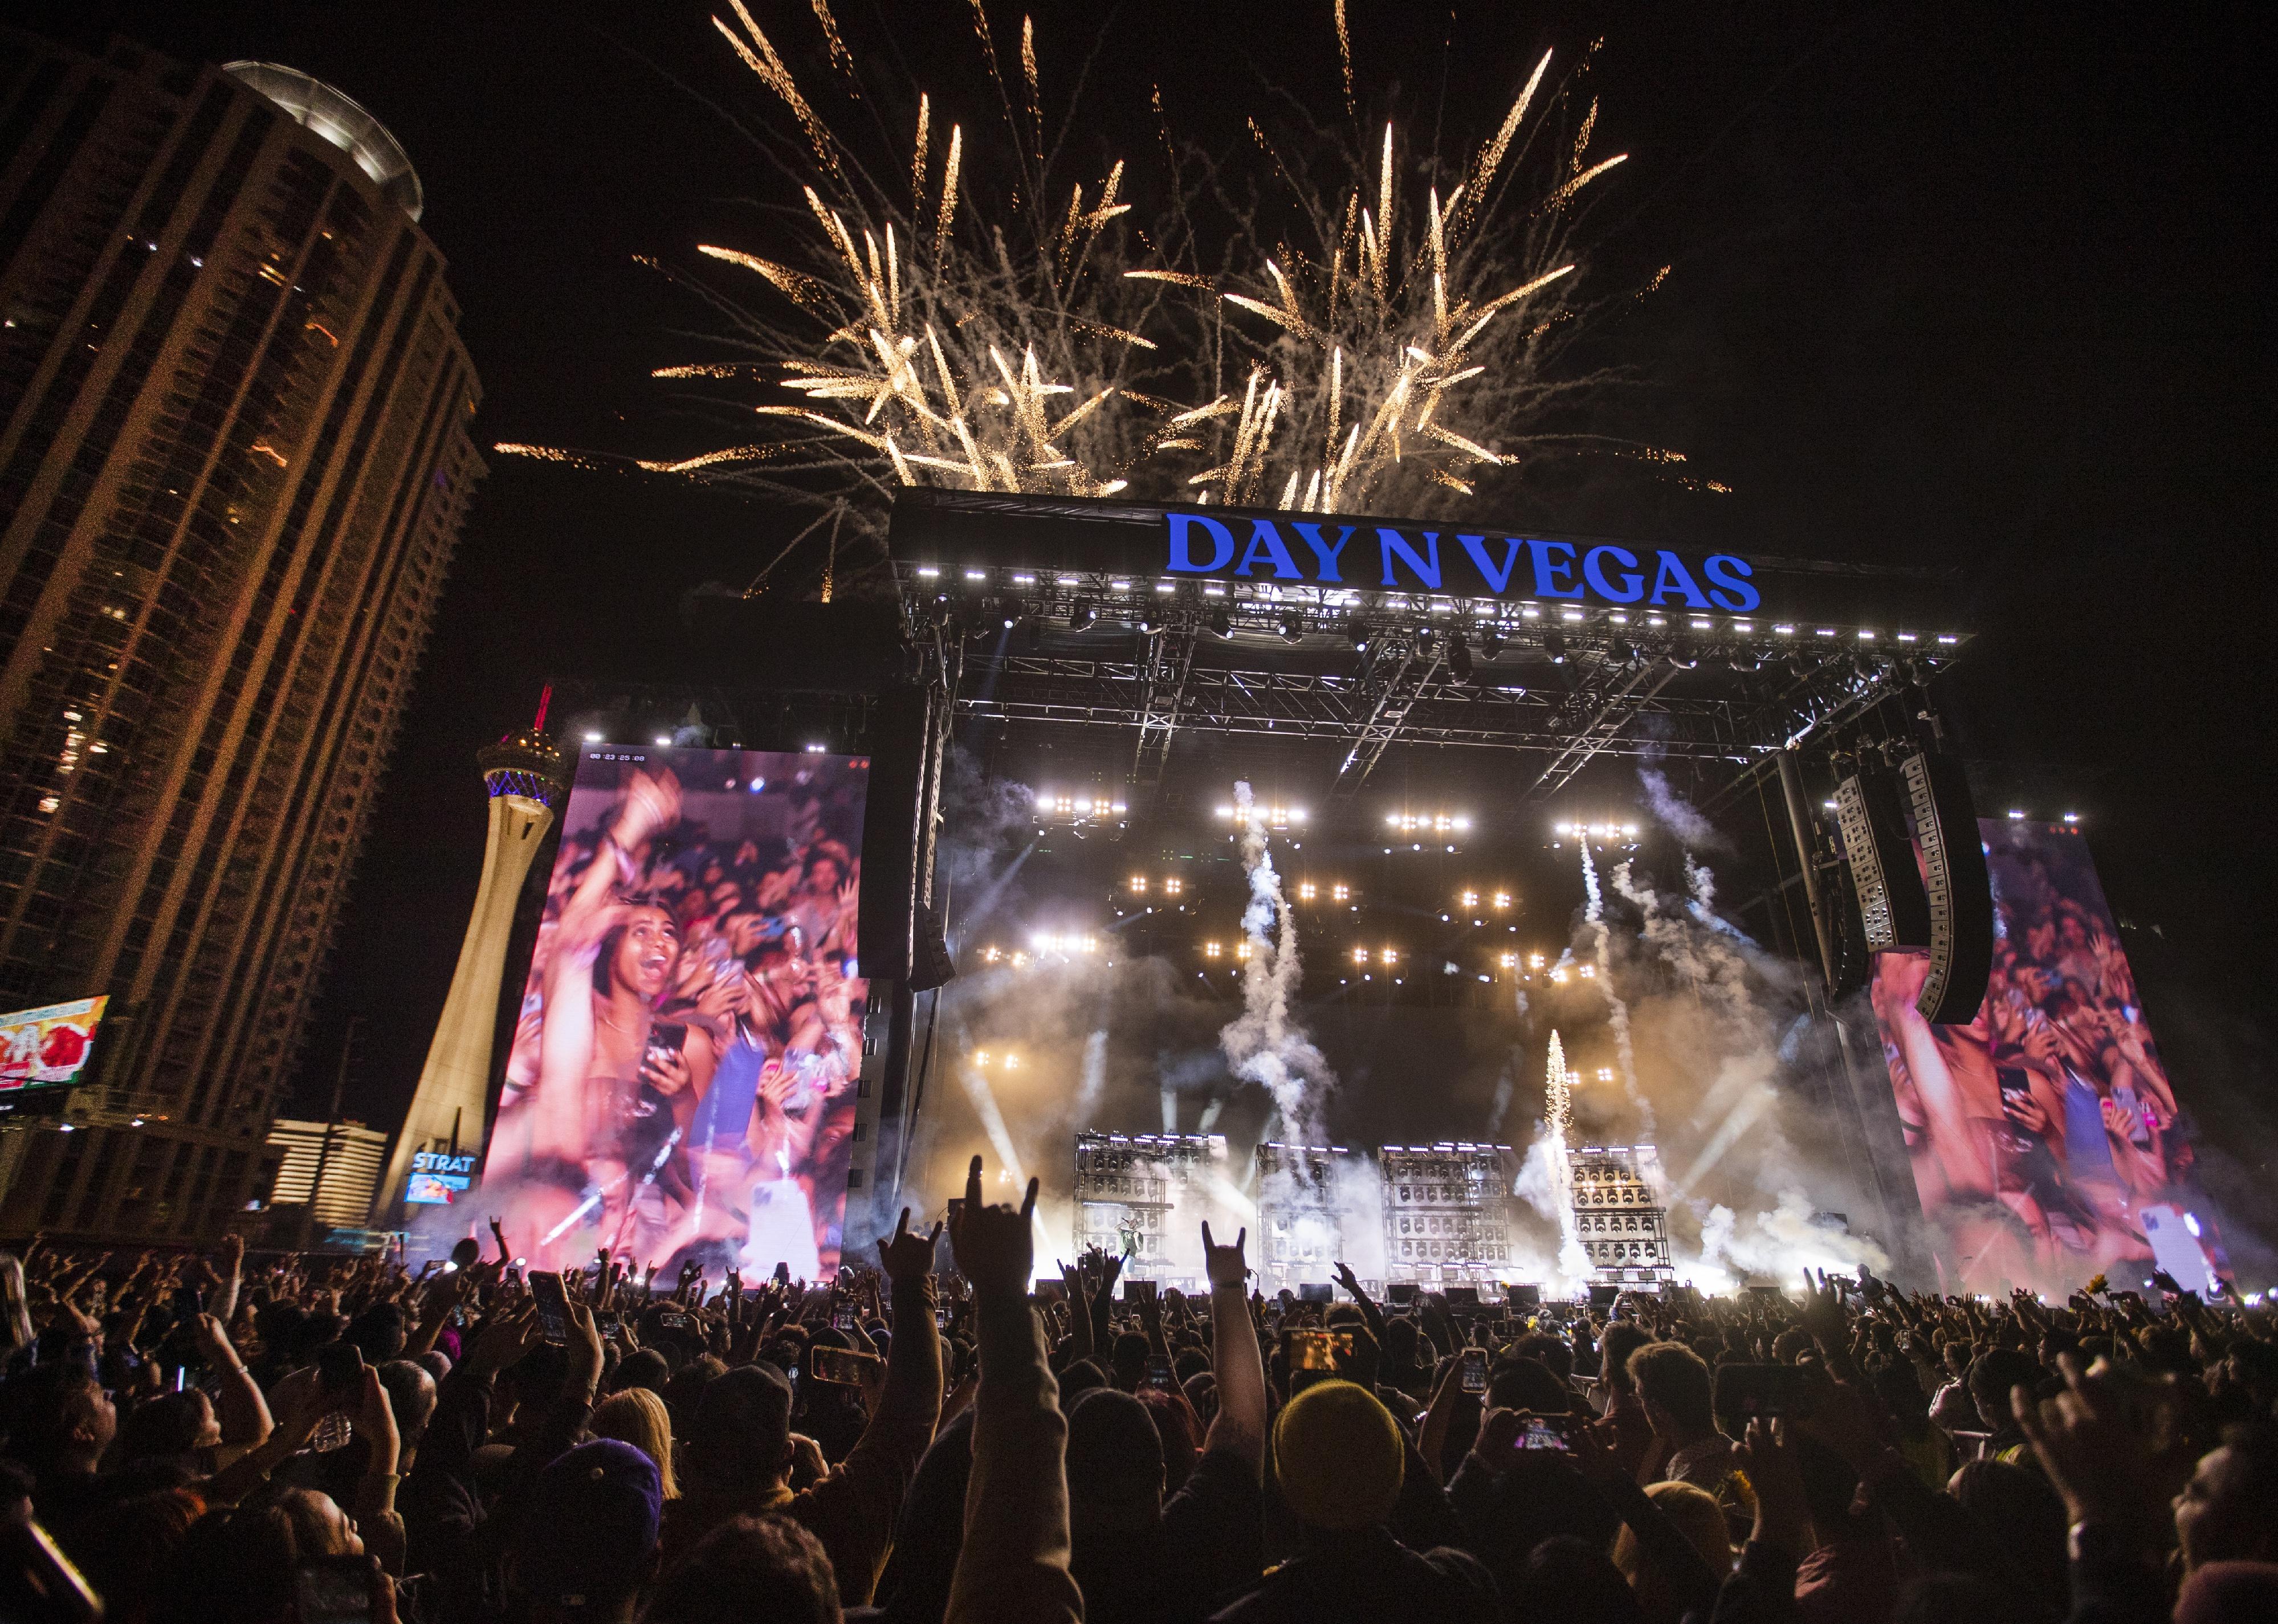 Fireworks explode as Saturday night headliner Post Malone performs during Day N Vegas festival.